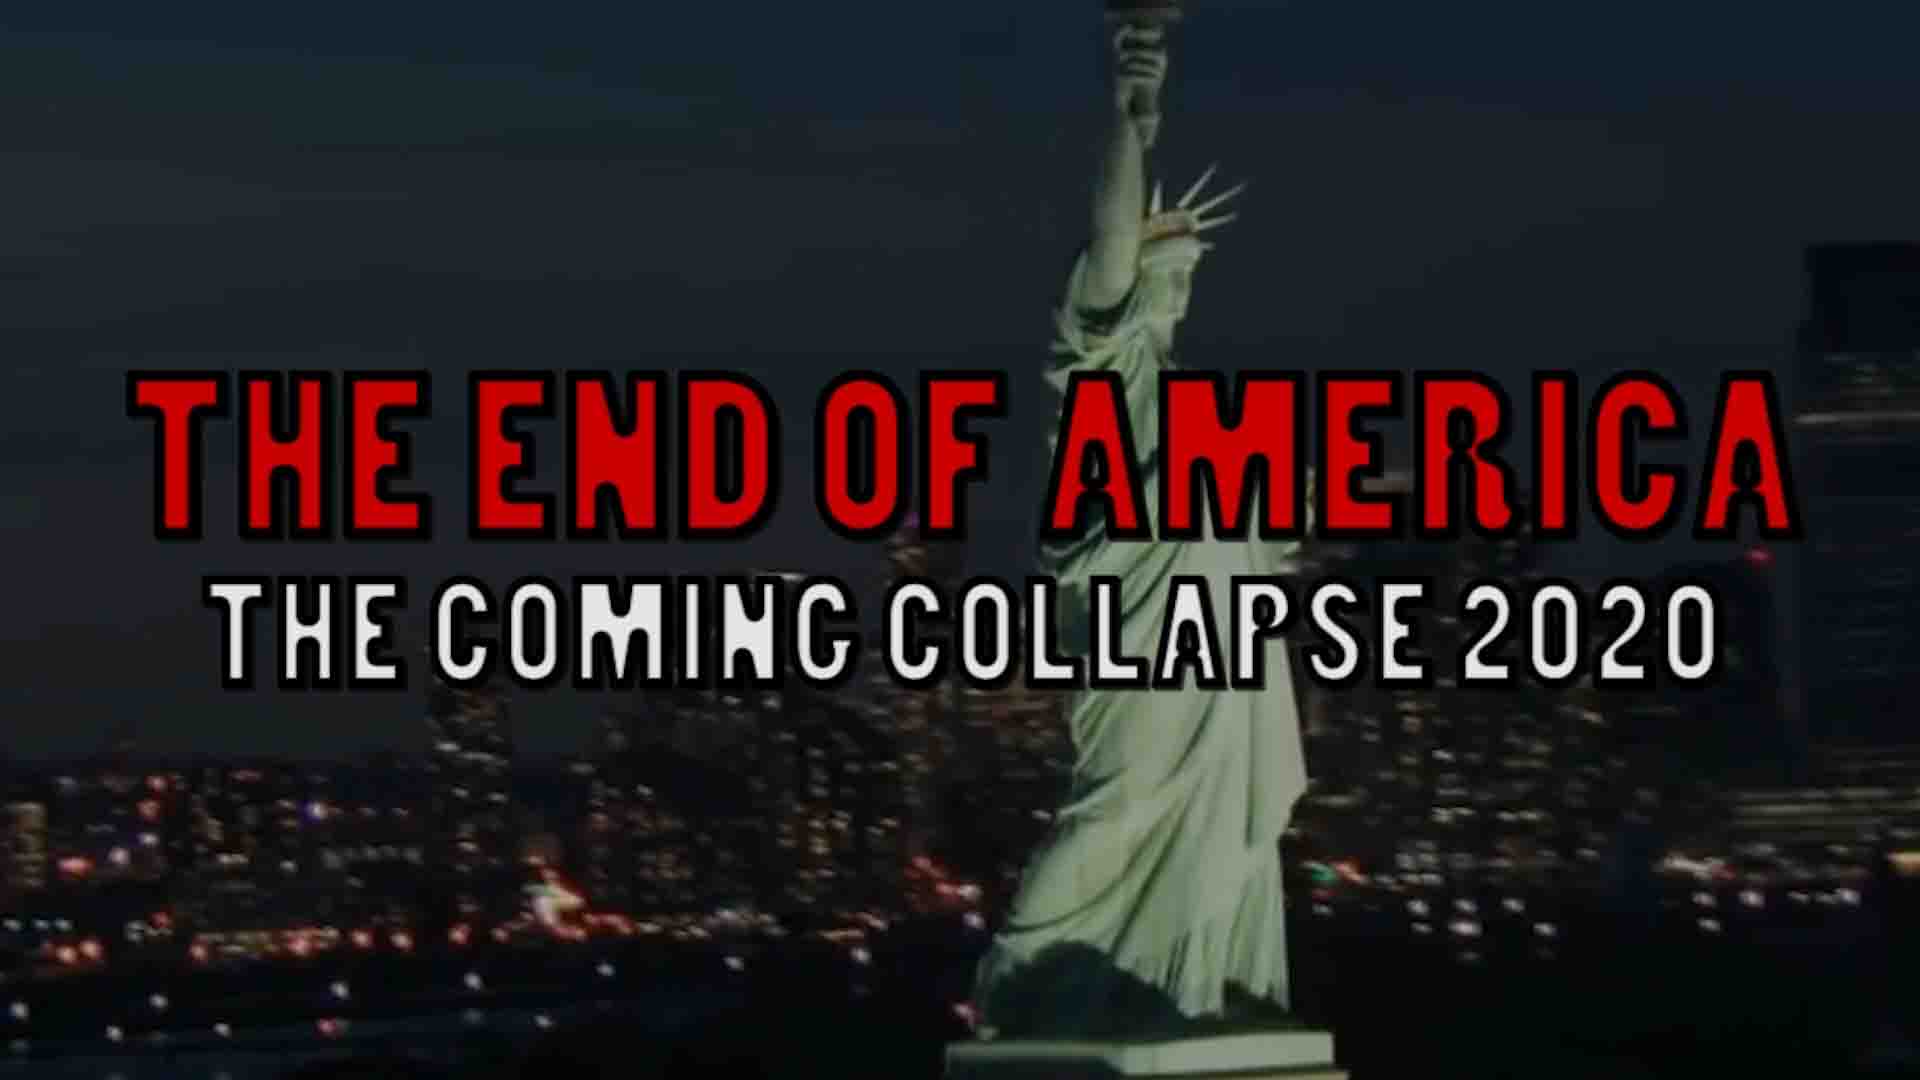 THE END OF AMERICA AND TOTAL COLLAPSE!!! WHAT COMES NEXT WILL TERRIFY